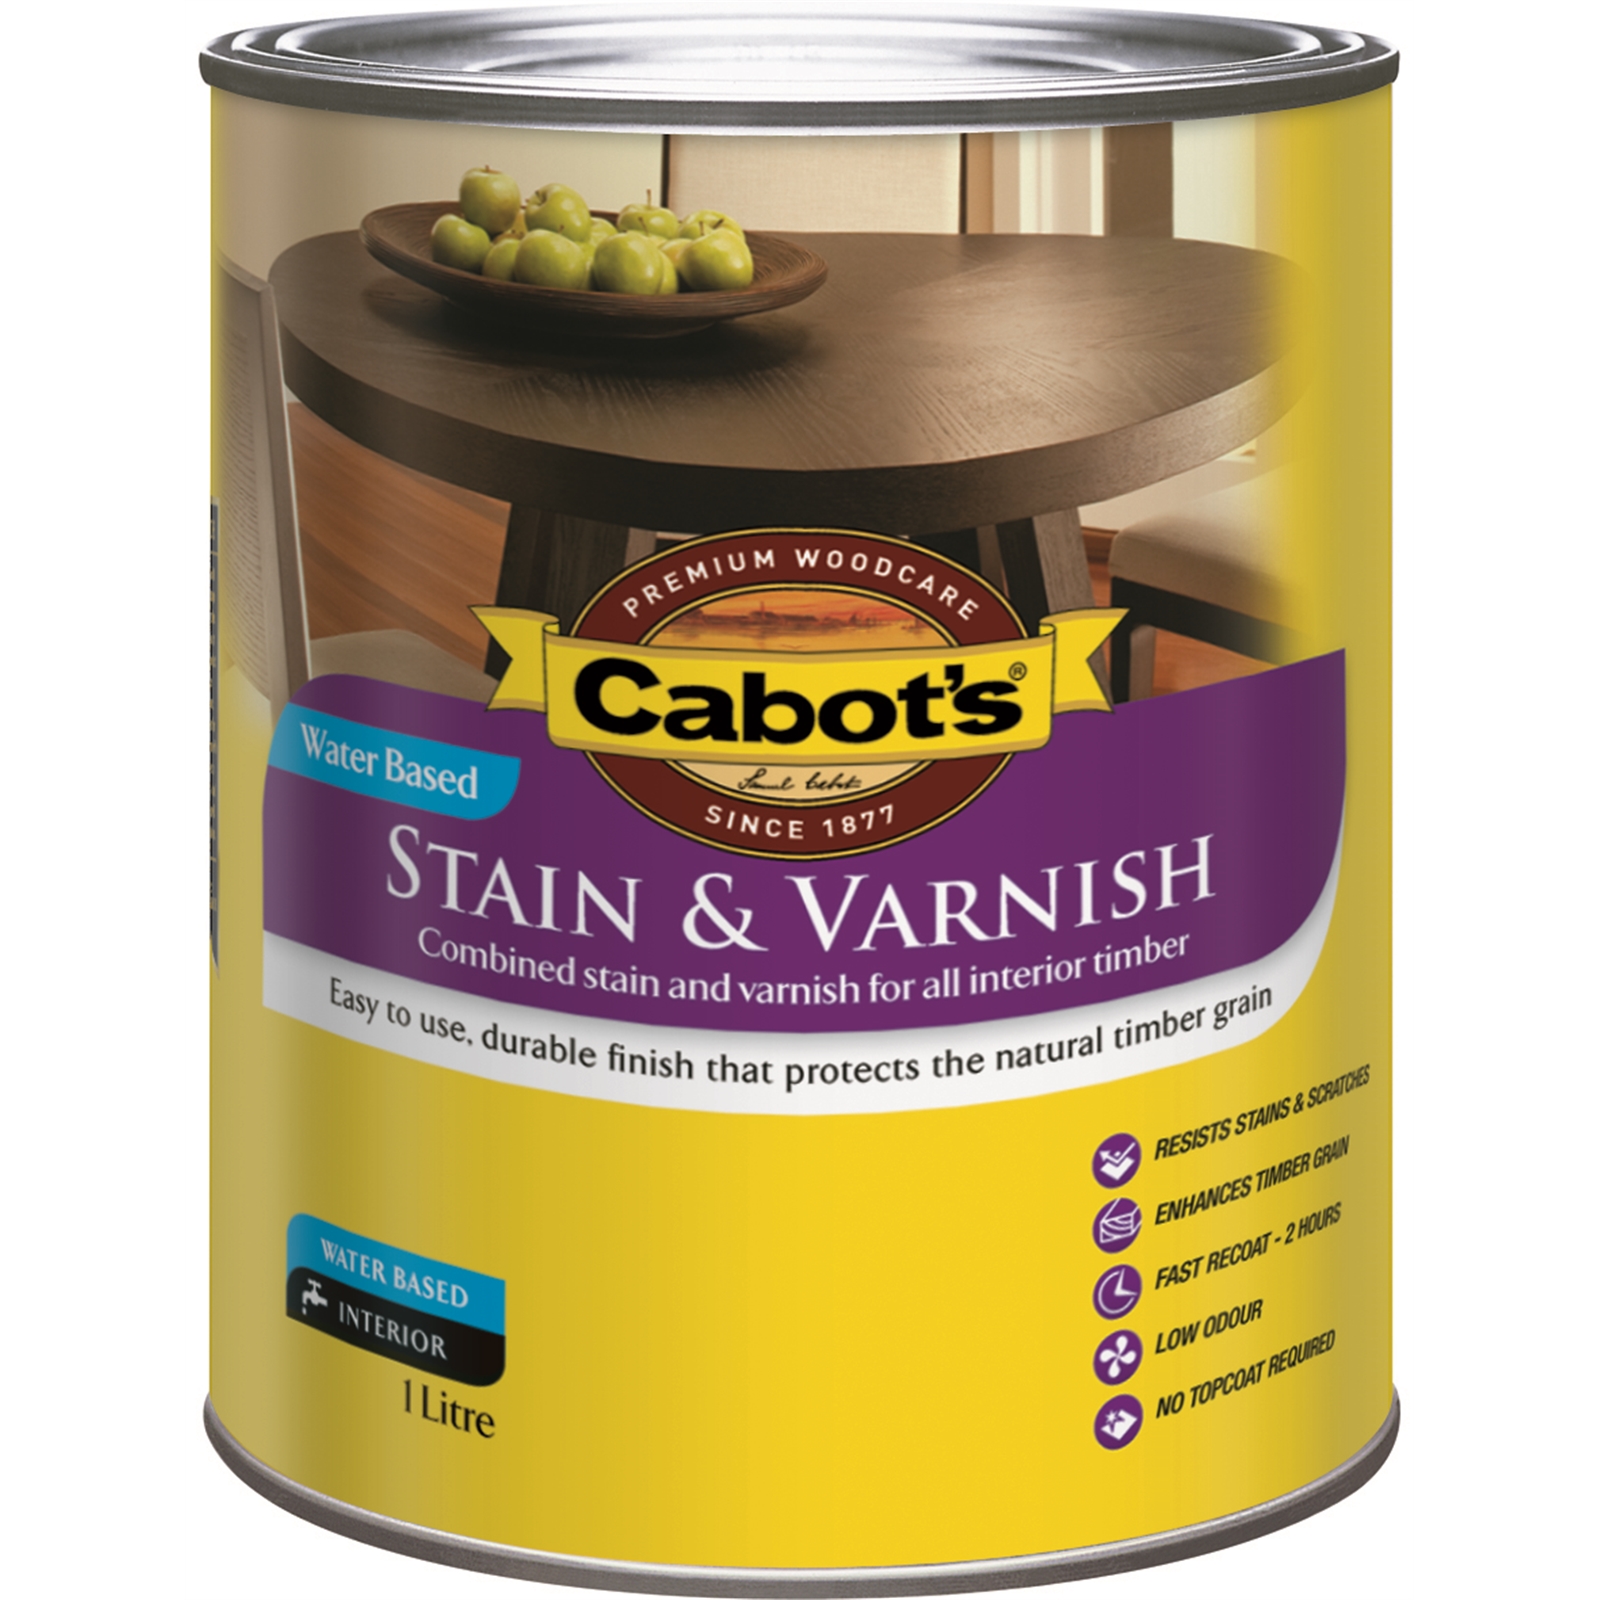 Cabot's 1L Gloss Jarrah Water Based Stain and Varnish